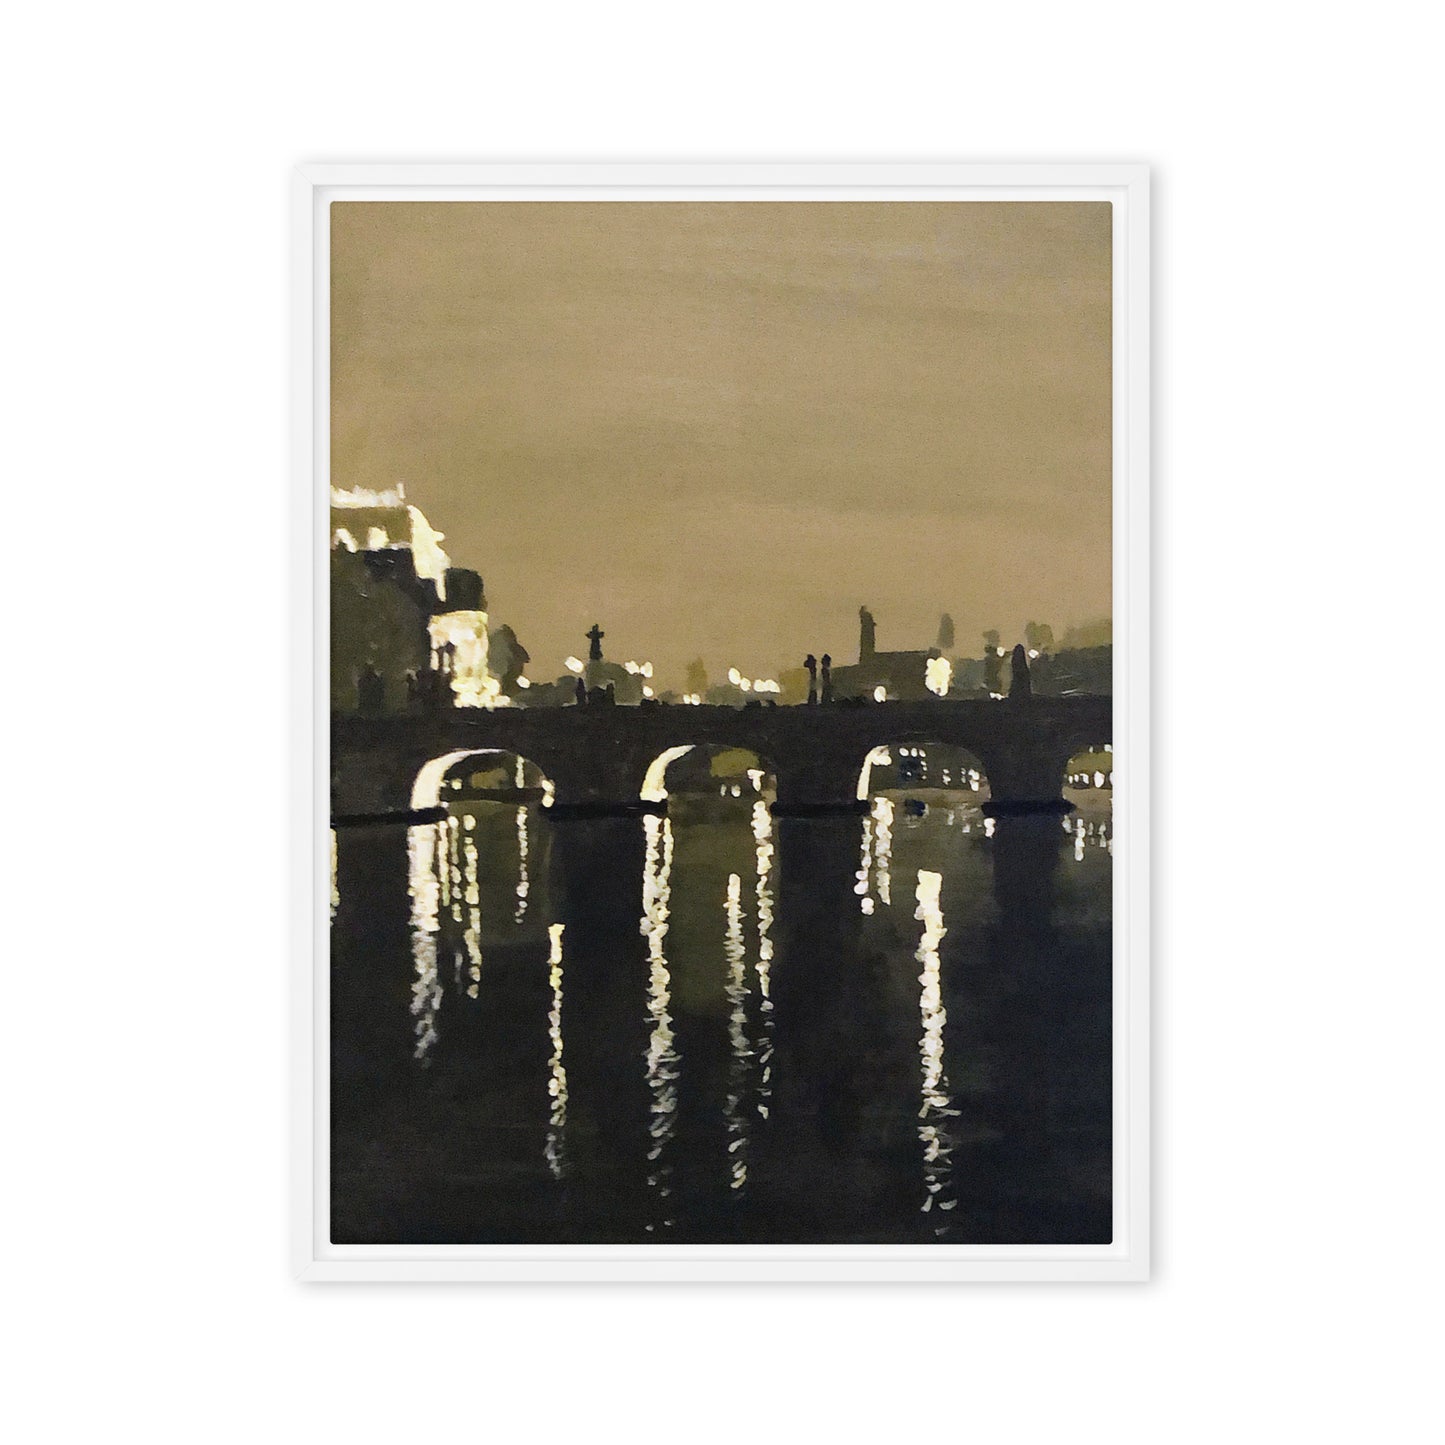 A View of the Charles Bridge in Prague- Framed canvas